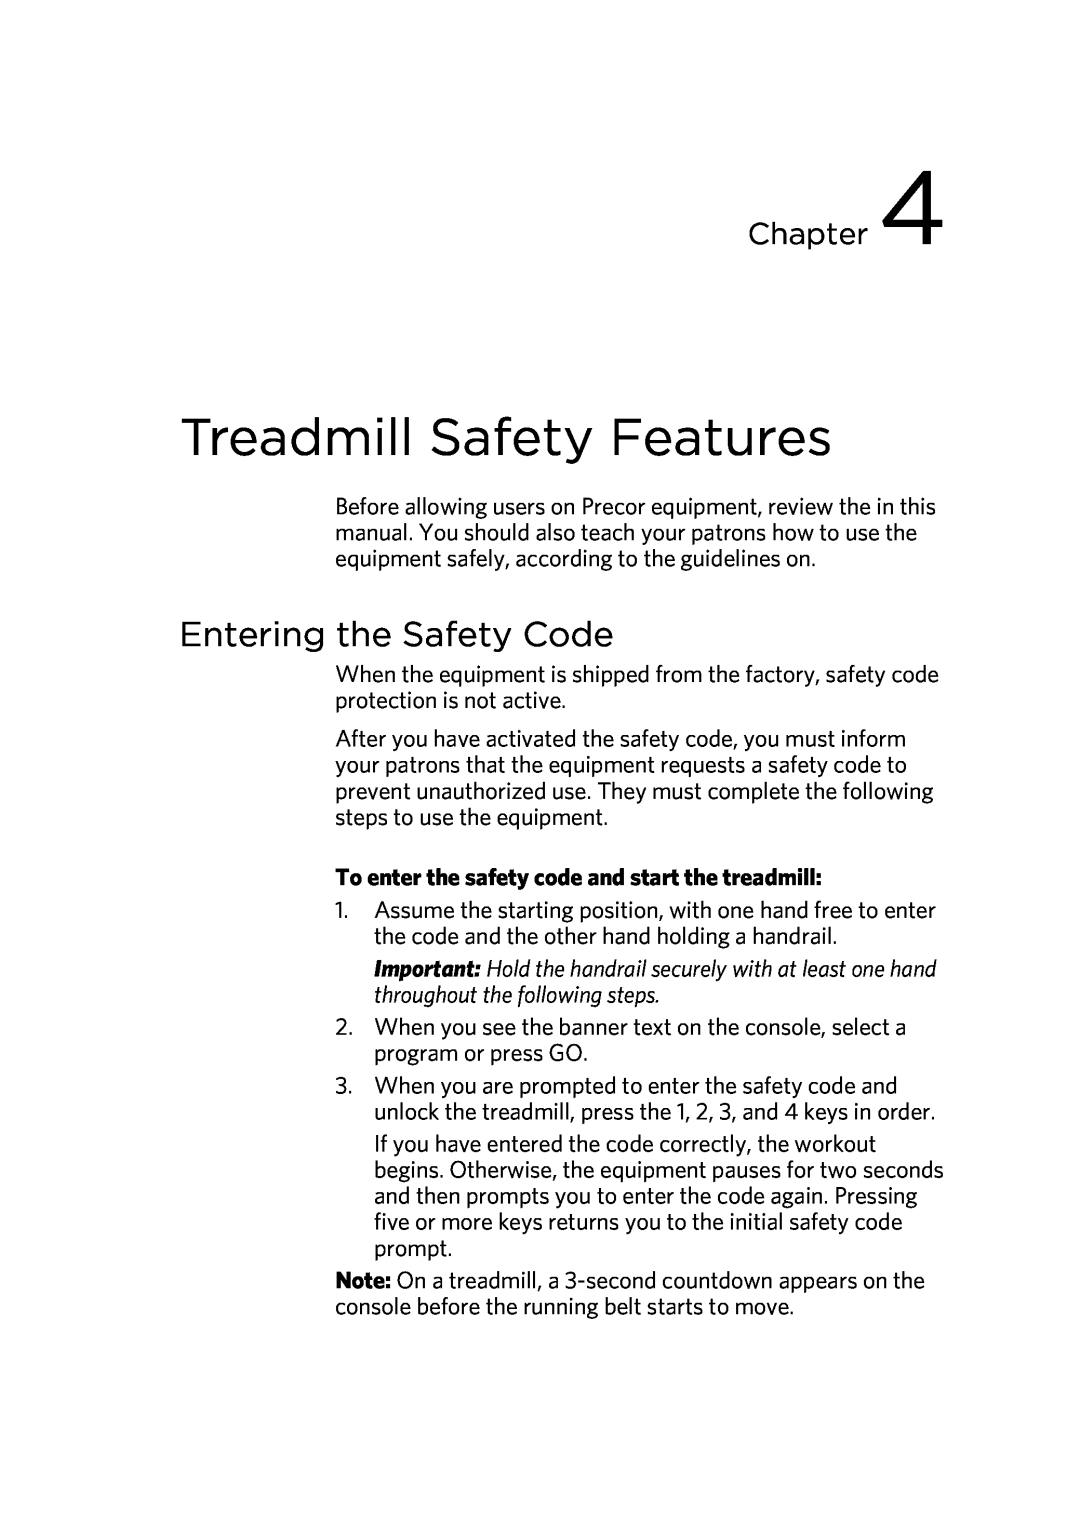 Precor P80 Treadmill Safety Features, Entering the Safety Code, To enter the safety code and start the treadmill, Chapter 